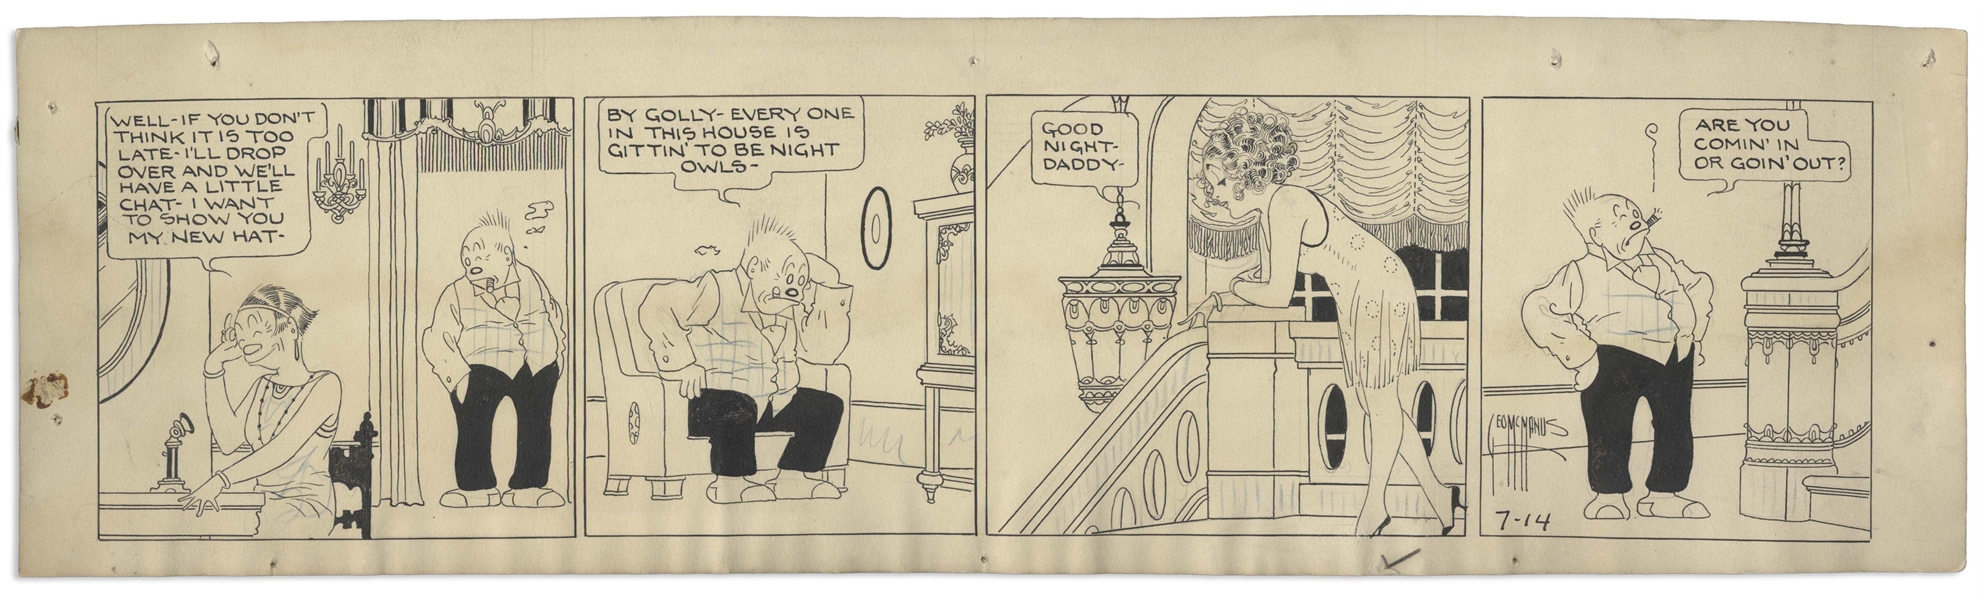 ''Bringing Up Father'' Comic Strip Hand-Drawn by George McManus